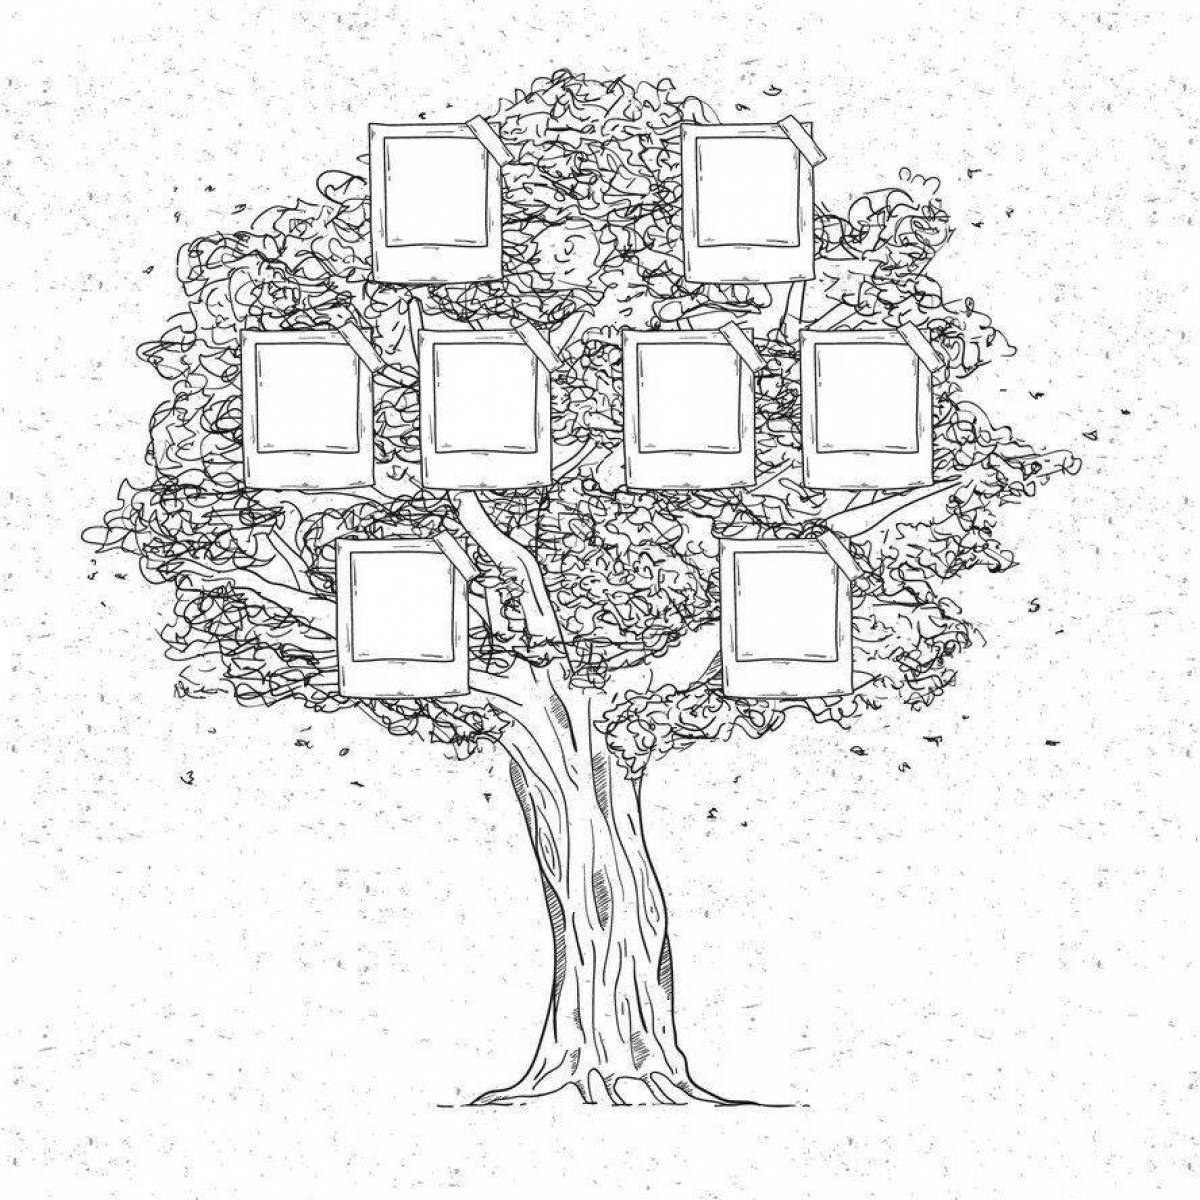 Charming family tree coloring book